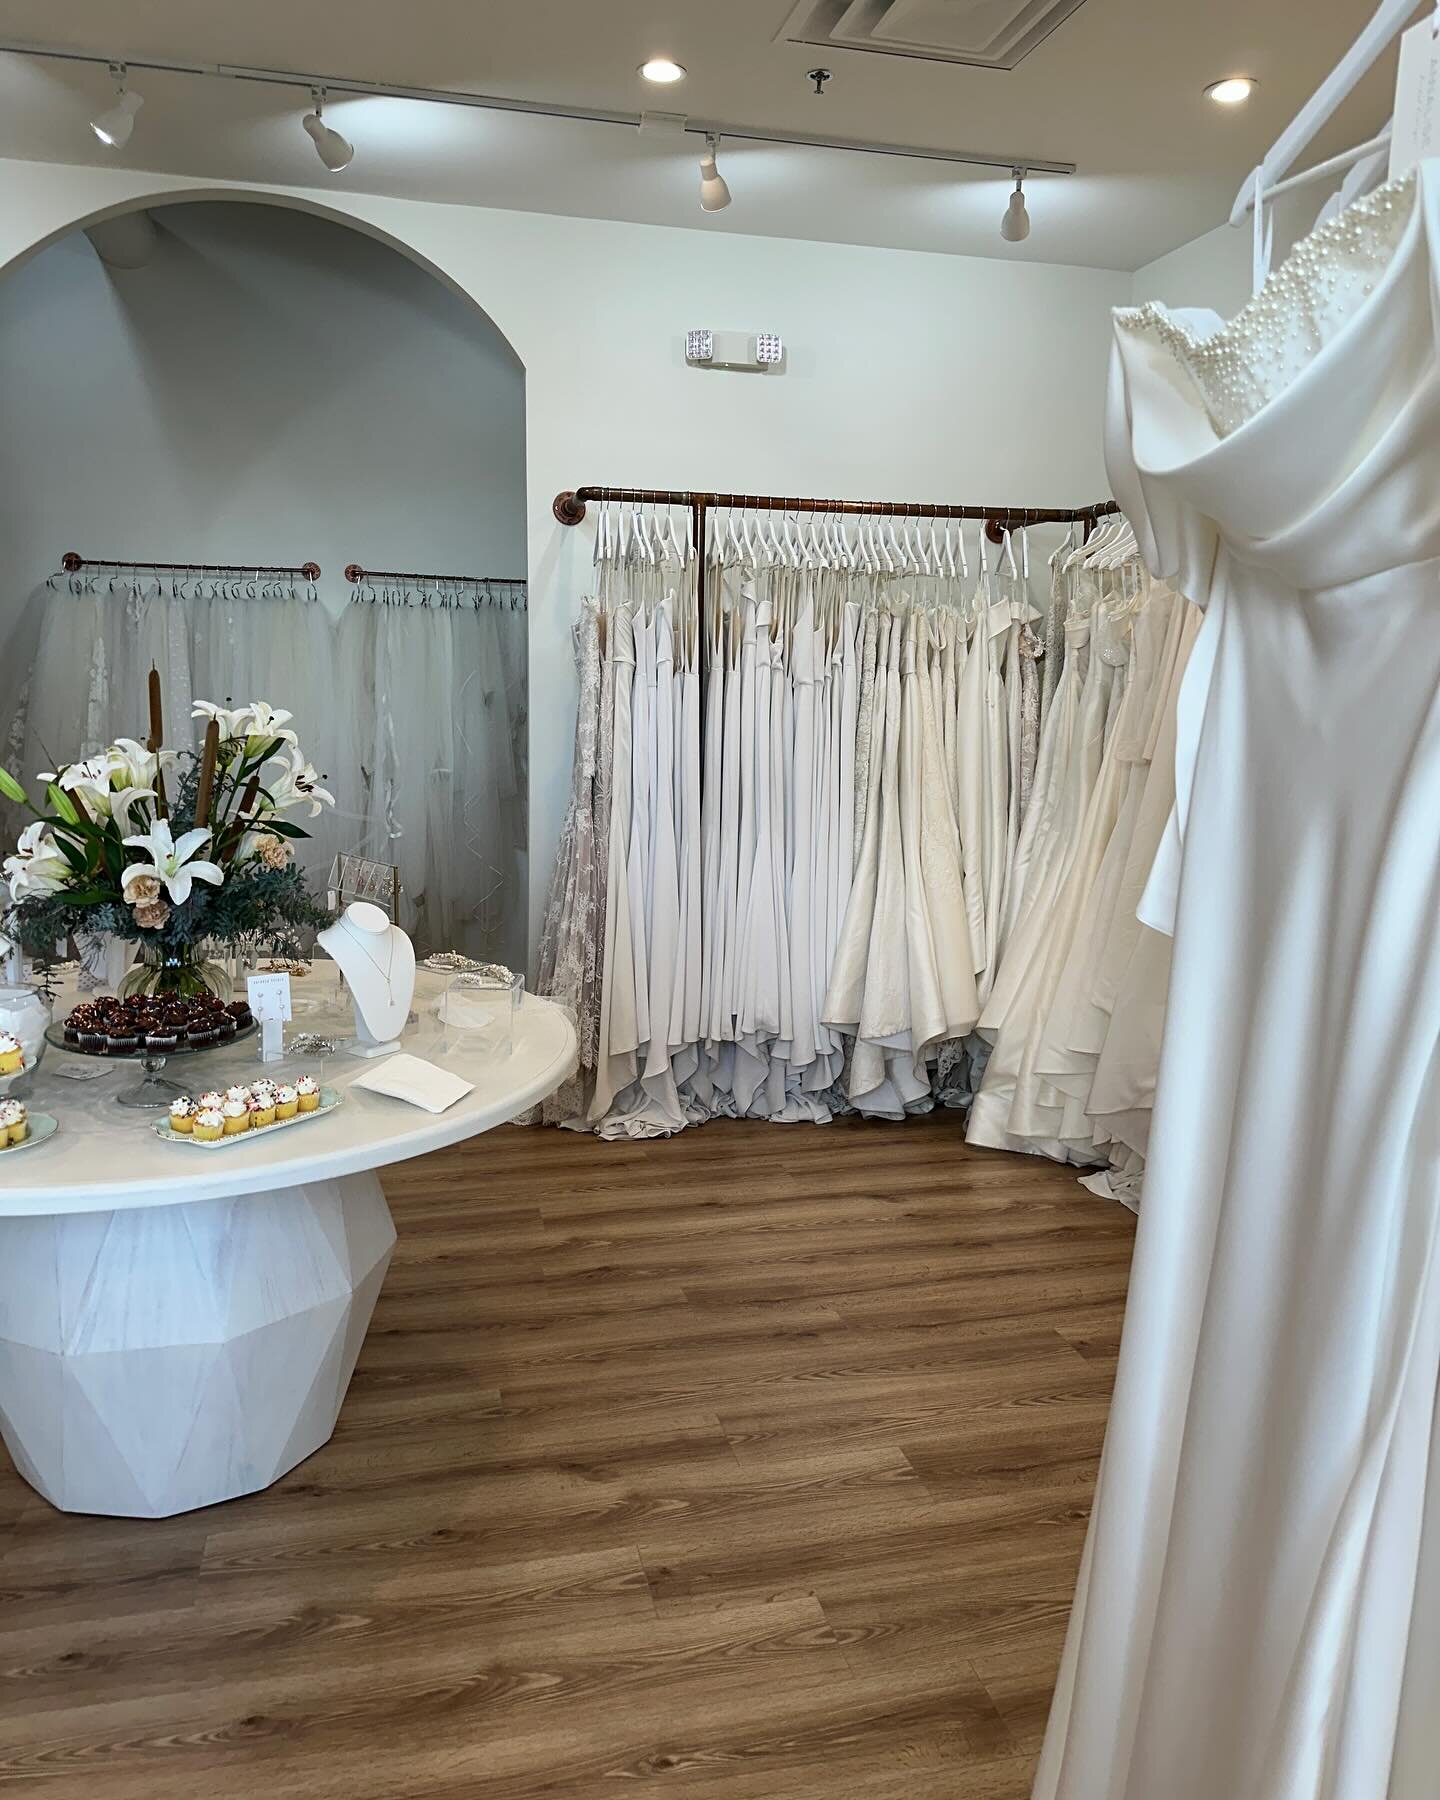 Future brides&hellip; @annalisebridal has some upcoming events you won&rsquo;t want to miss out on! ✨

Starting this Friday, Annalise Bridal is hosting a trunk show that will feature a collection of handpicked gowns from @madilanebridal! Brides who p